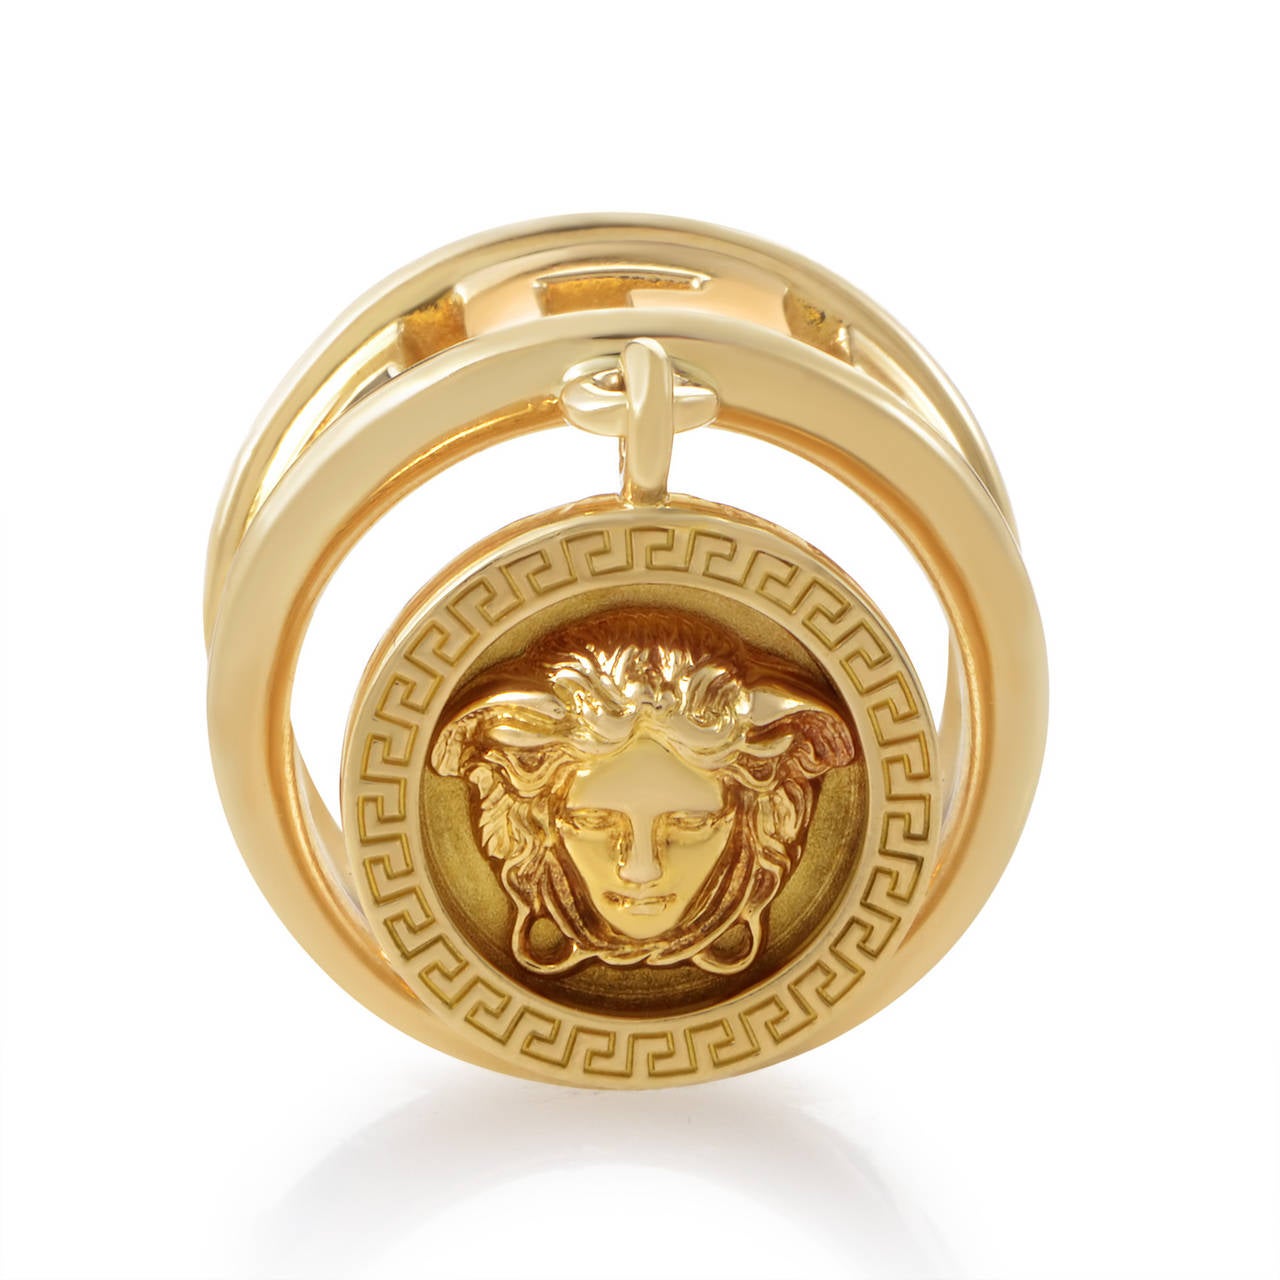 The Versace Medusa head is a symbol of status and across the world. This dazzling ring displays the renowned motif from a charm that dangles from its 18K yellow gold body.

Ring Size: 6.0 (51 1/2)